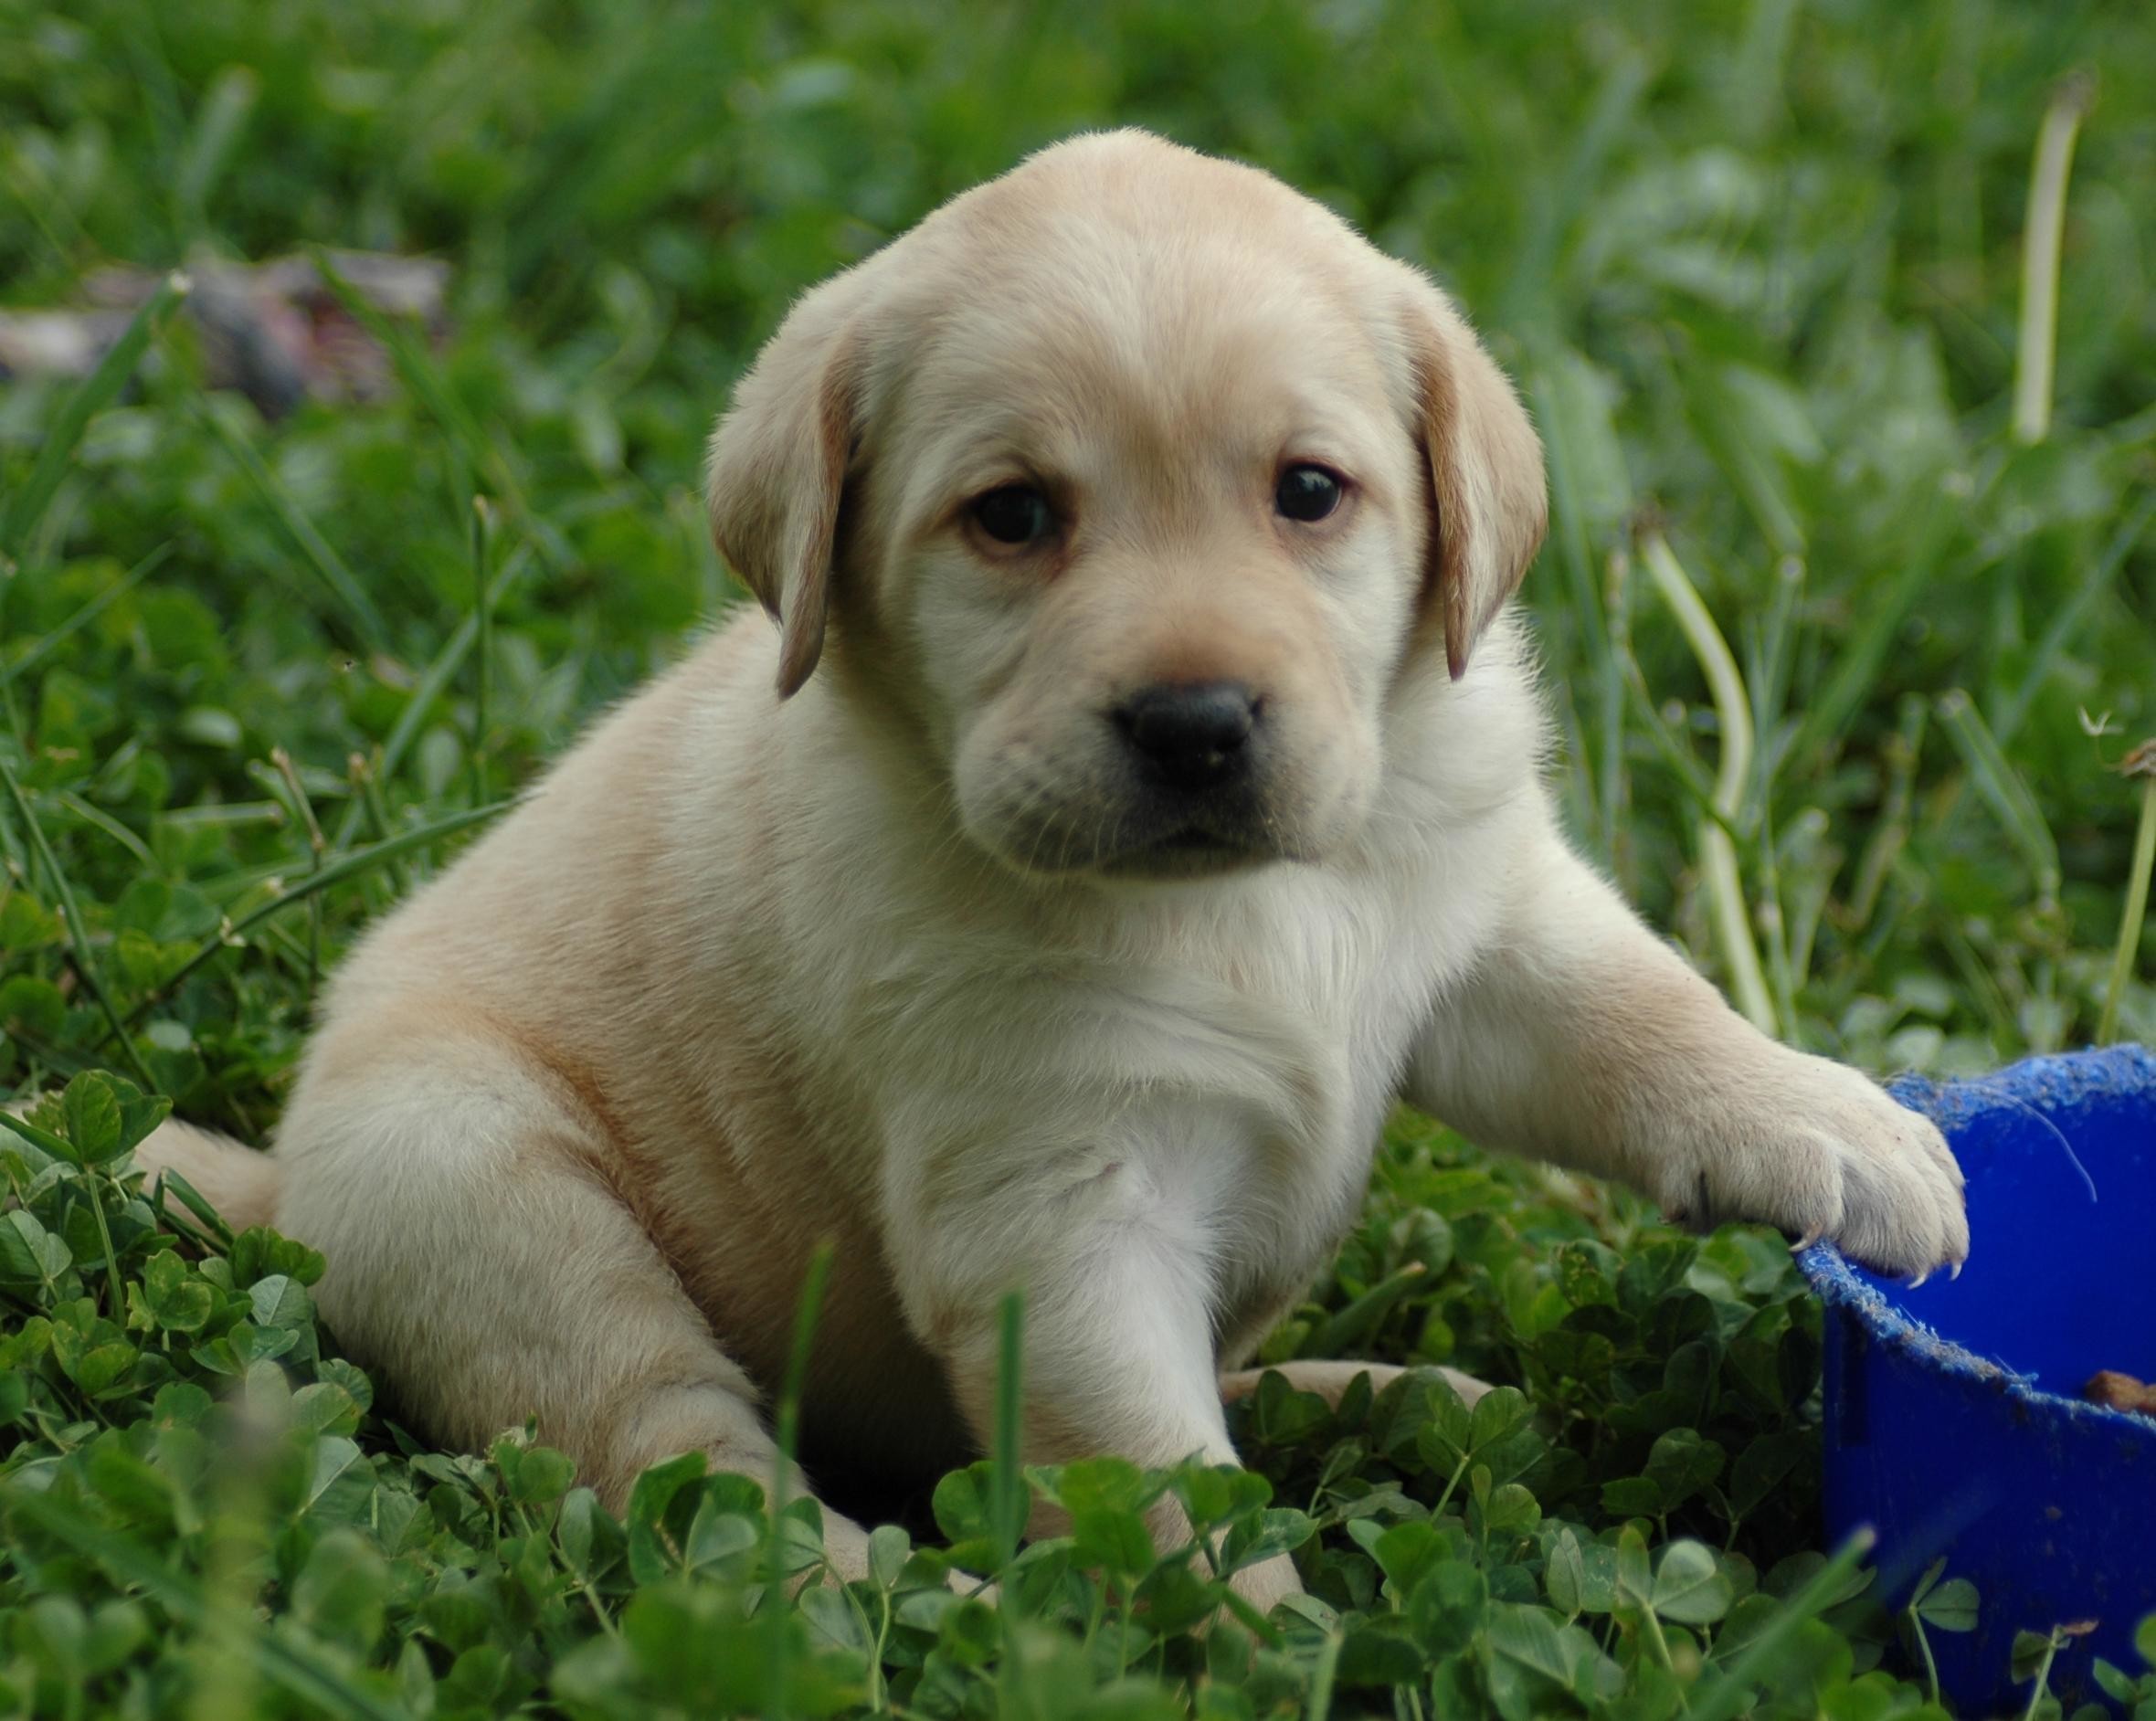 2360x1884 Puppy Lab Hd Wallpaper Free Images At Clker Vector